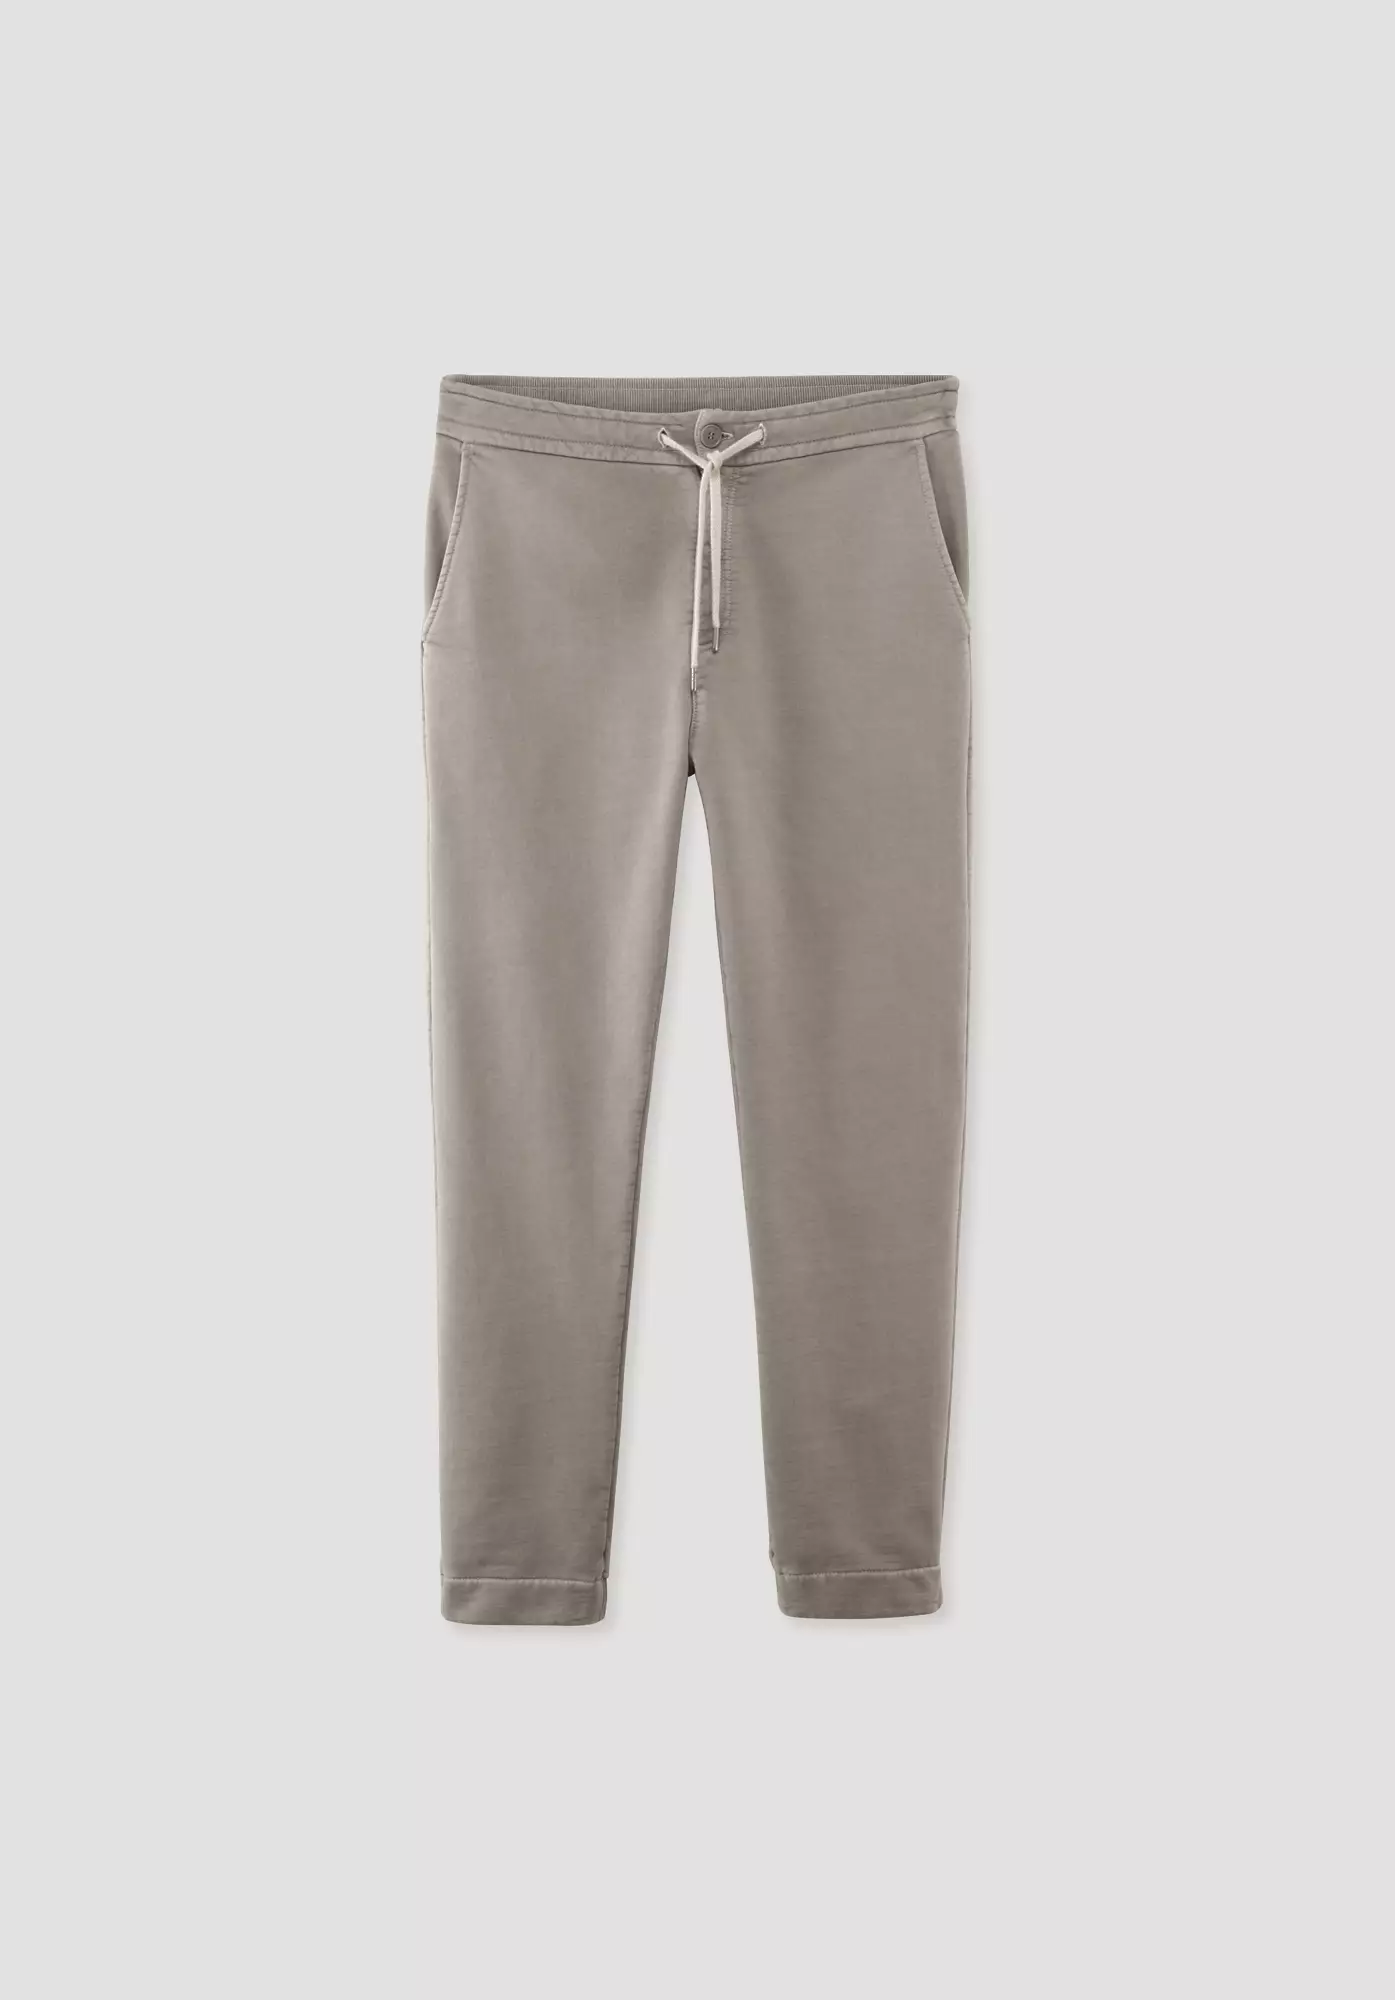 Jogging pants, mineral-dyed, made of pure organic cotton - 4